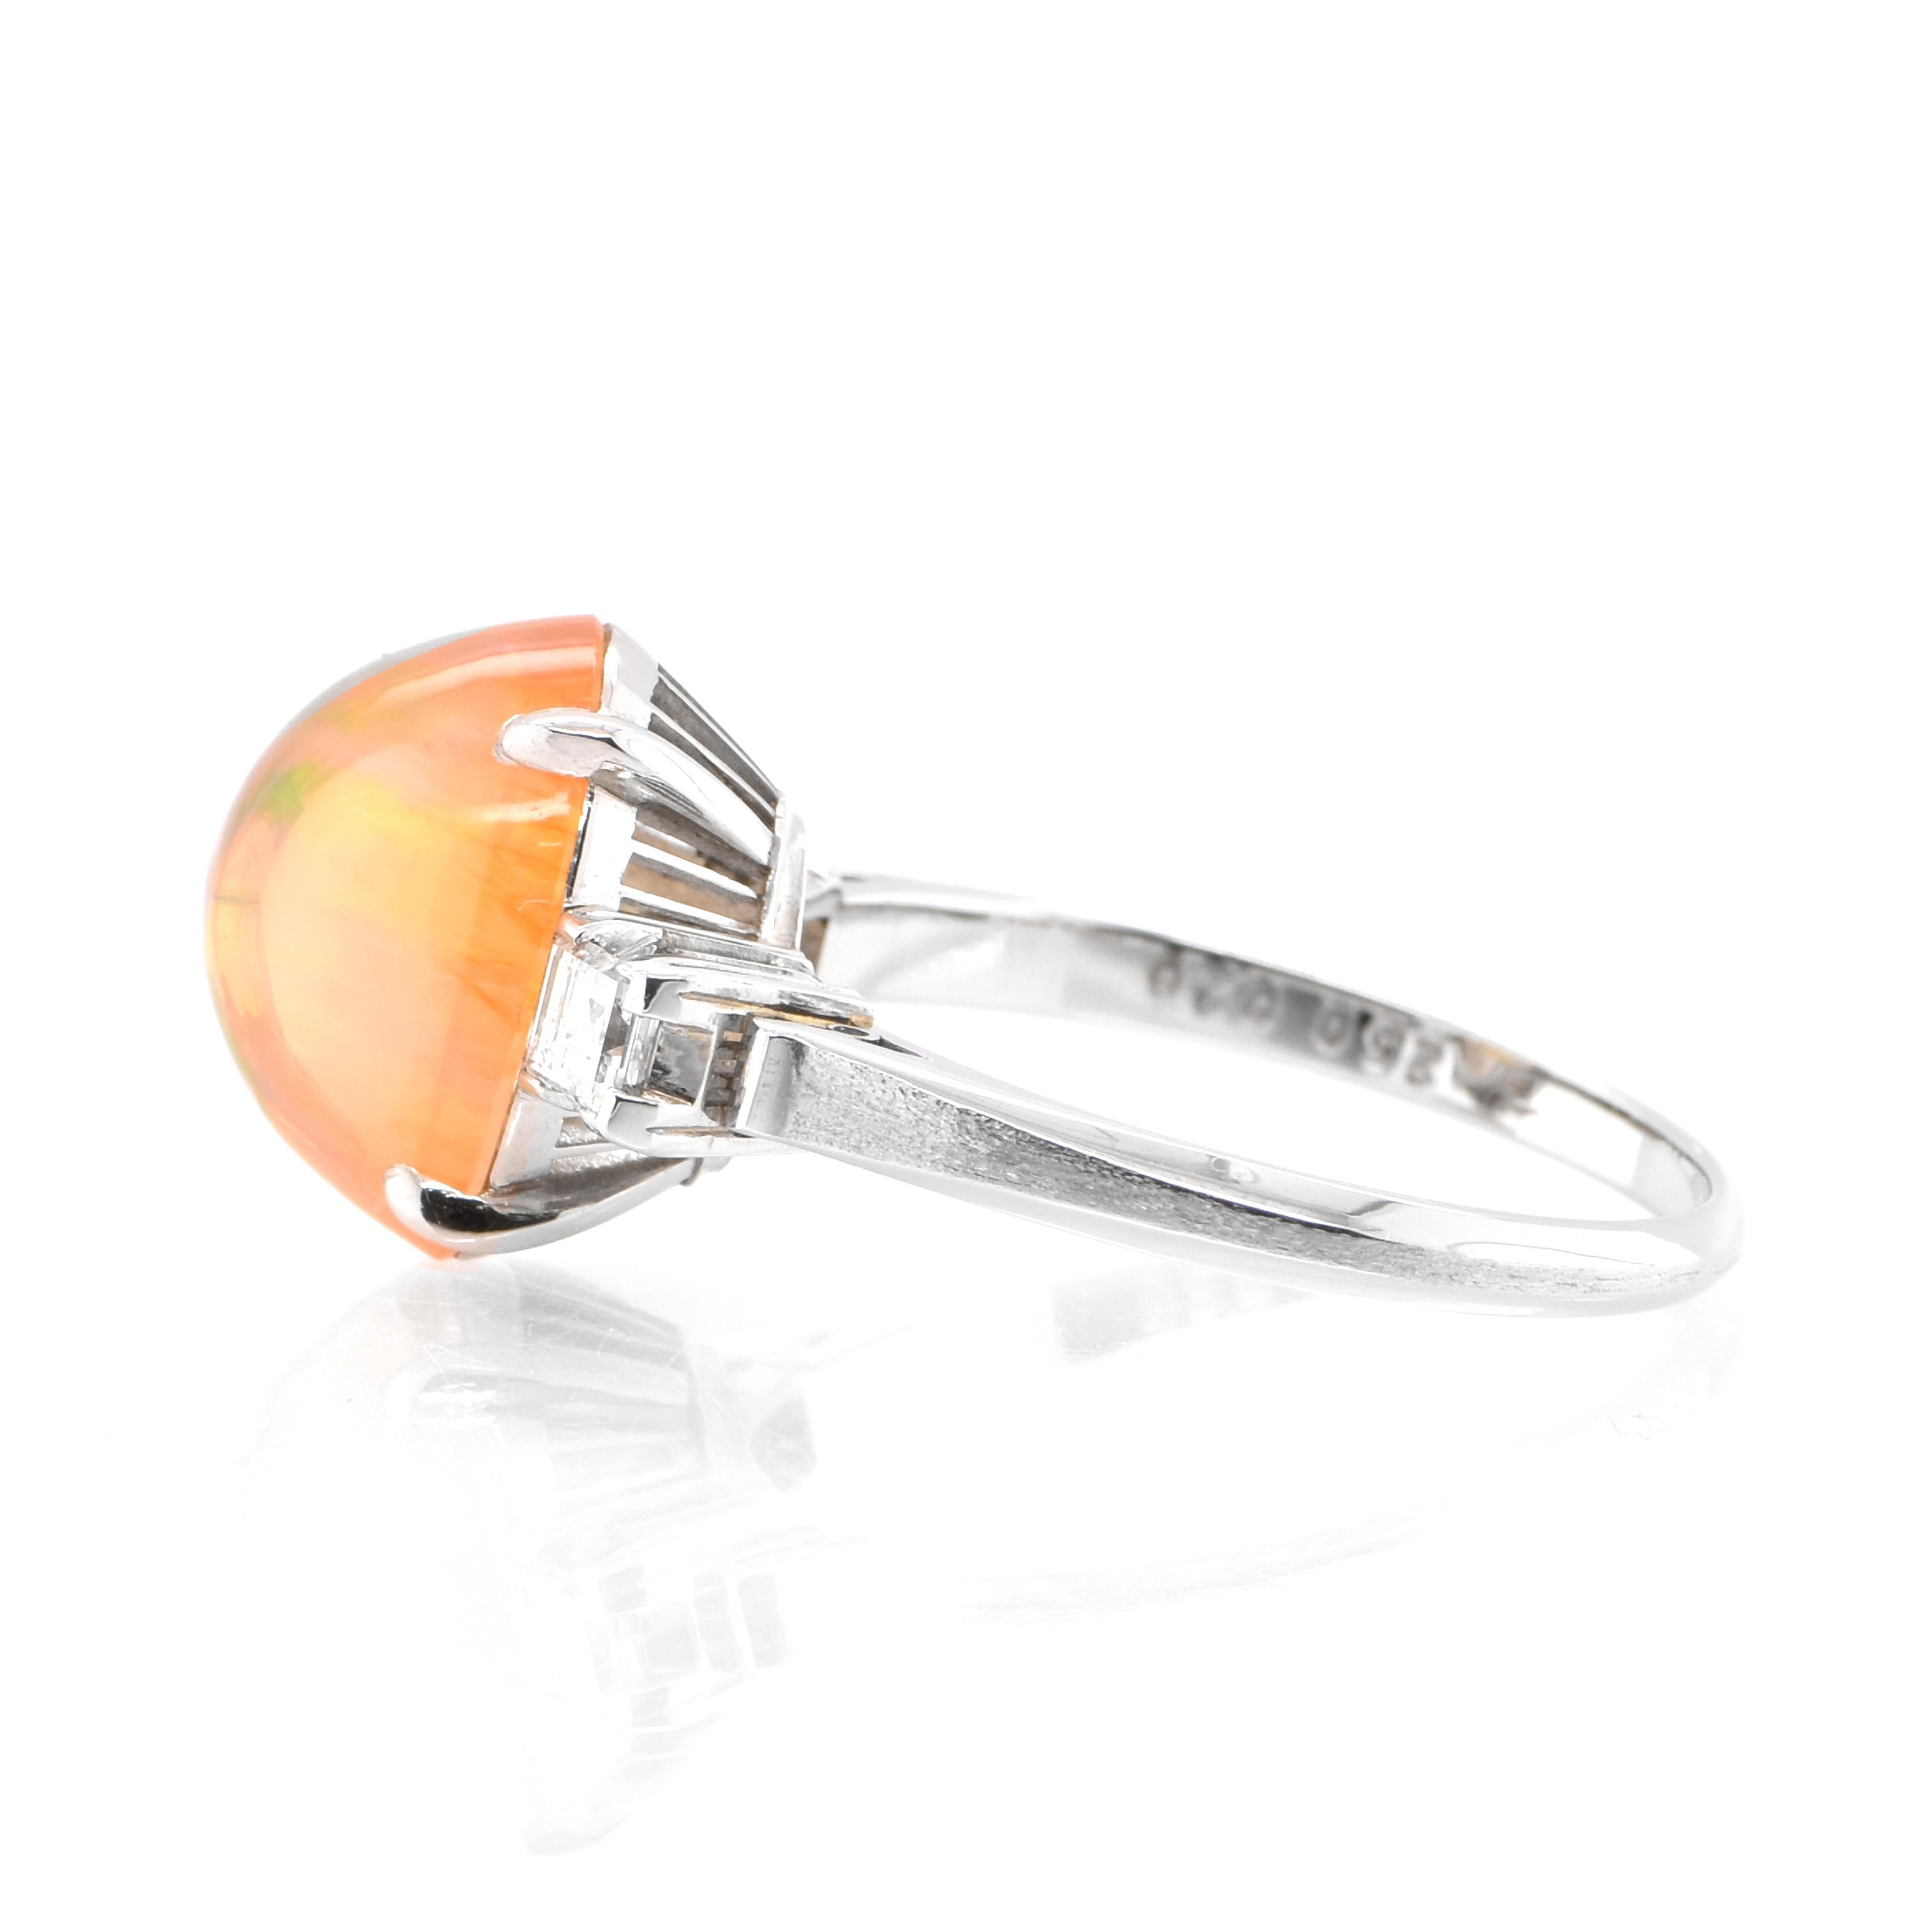 Cabochon 2.50 Carat Natural Fire / Cherry Opal and Diamond Ring Set in Platinum